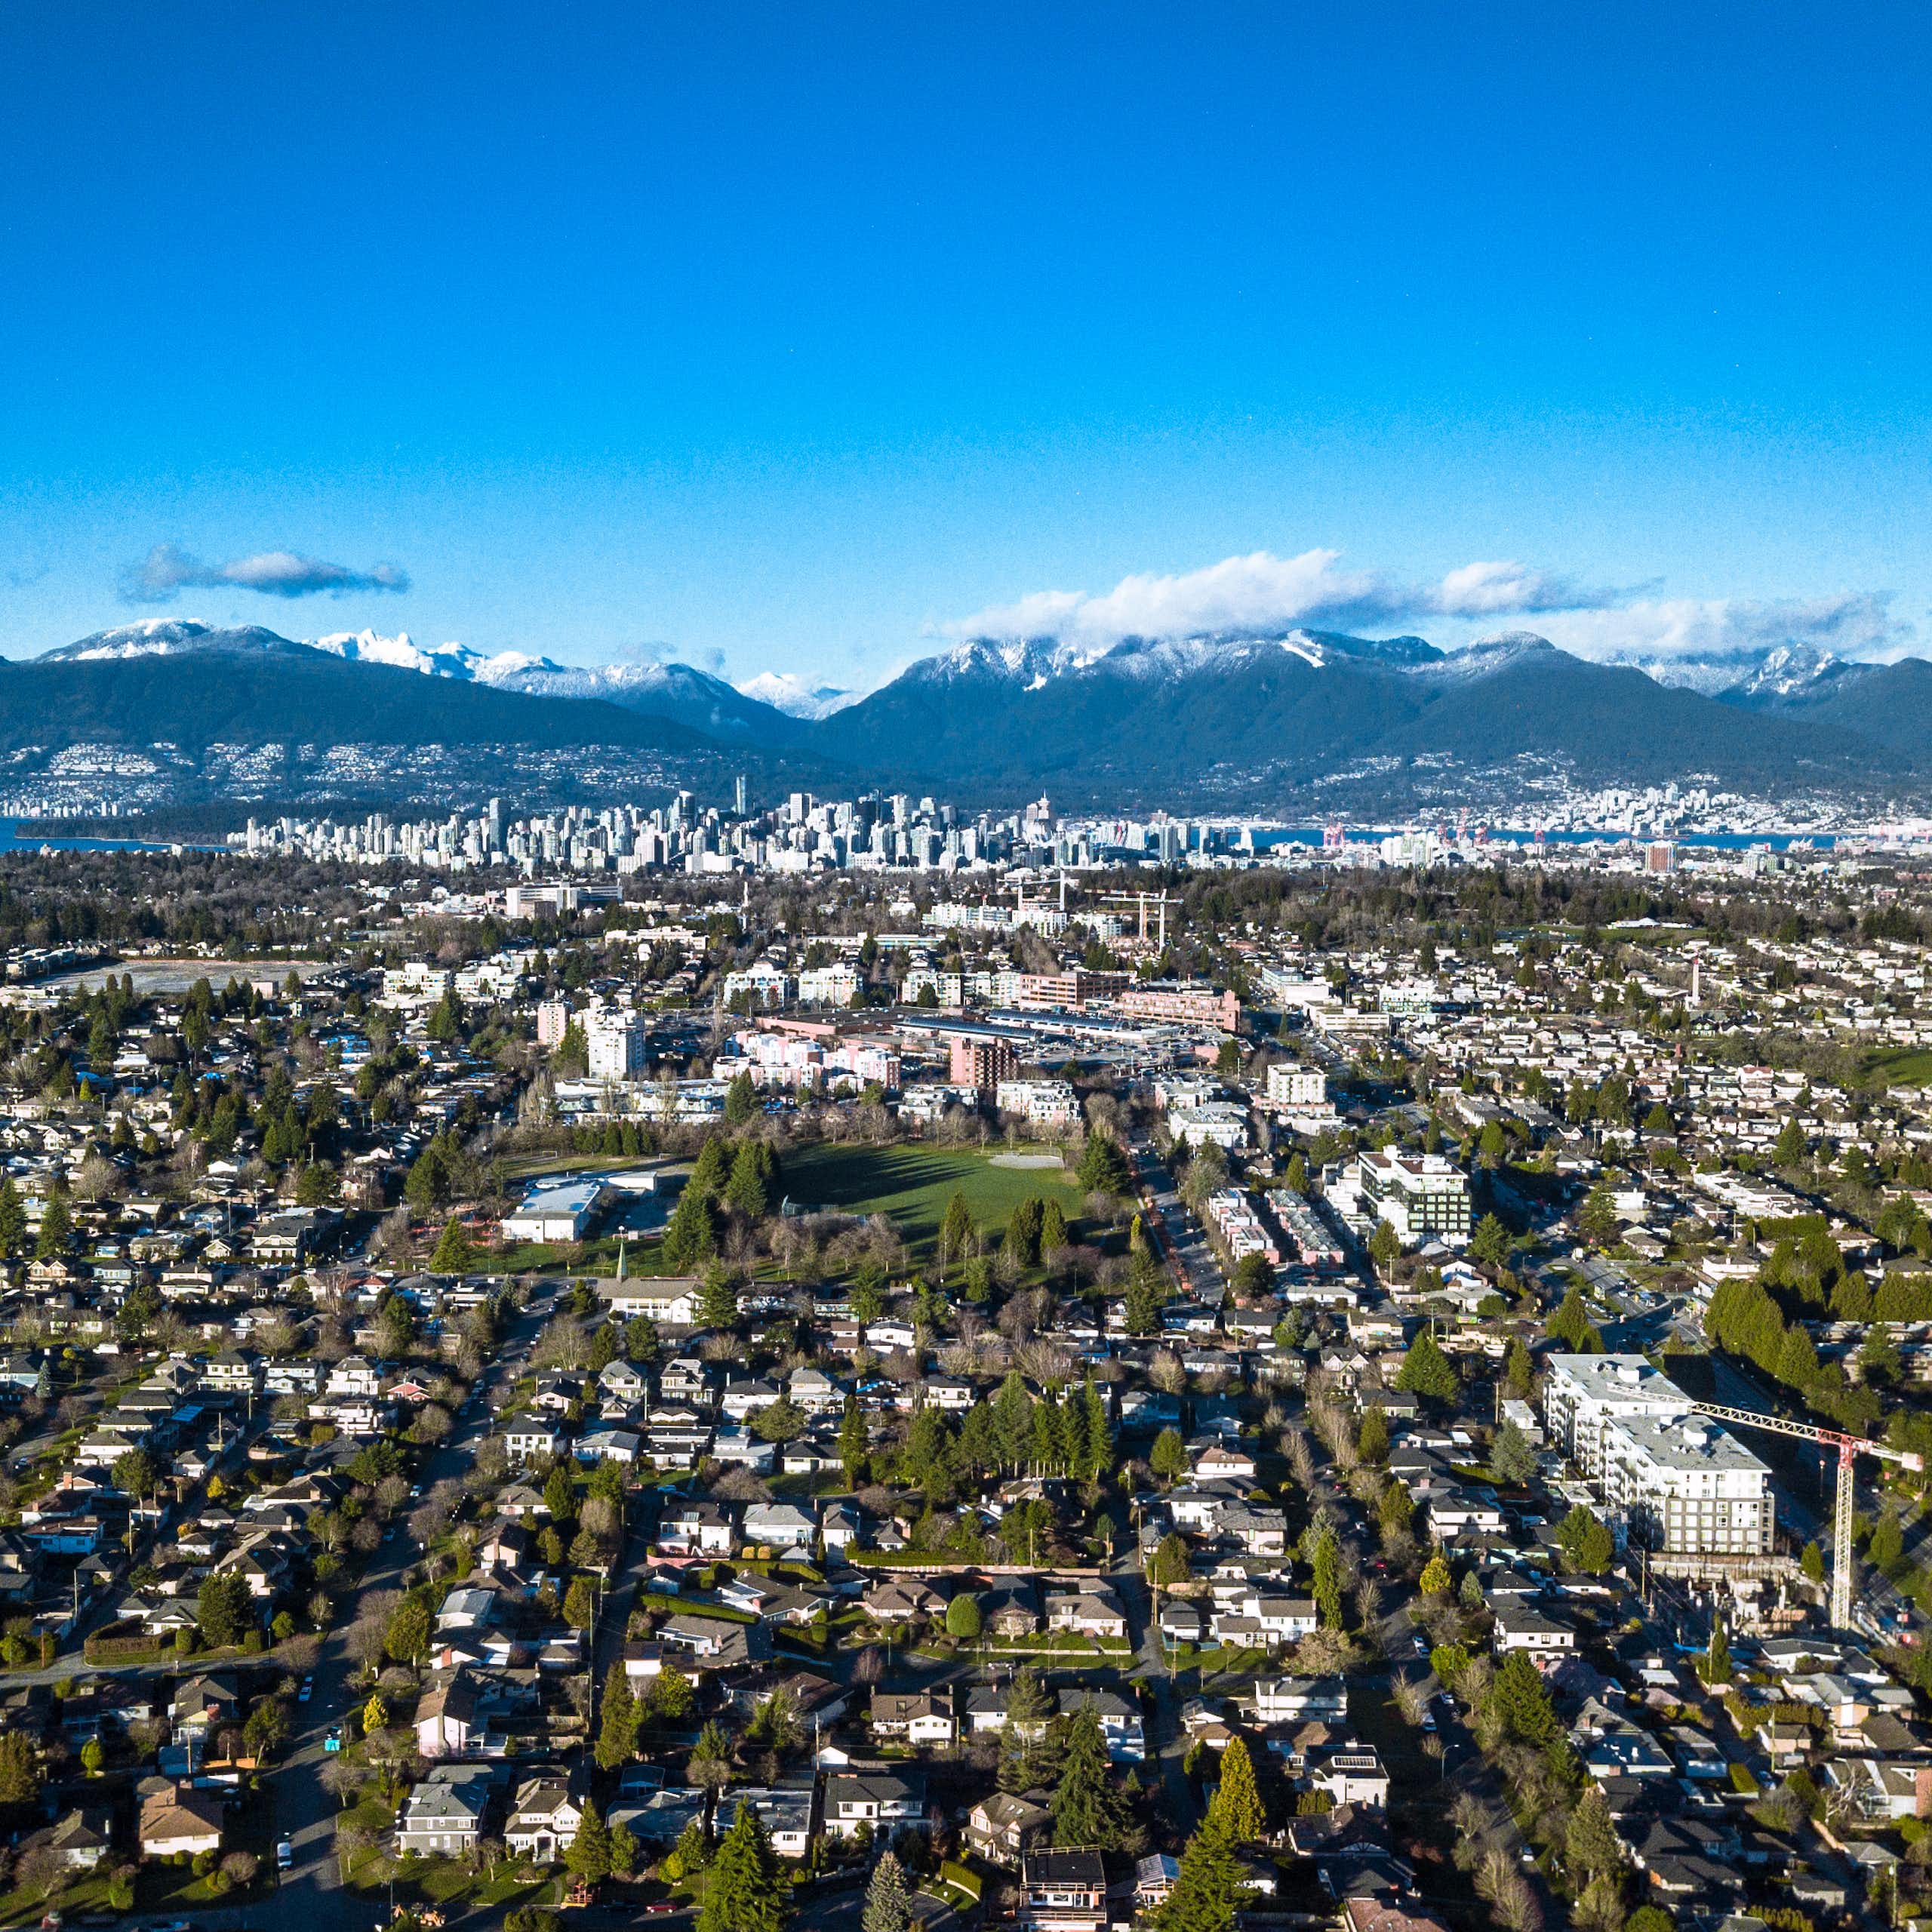 An aerial view of an urban area with mountains in the background.